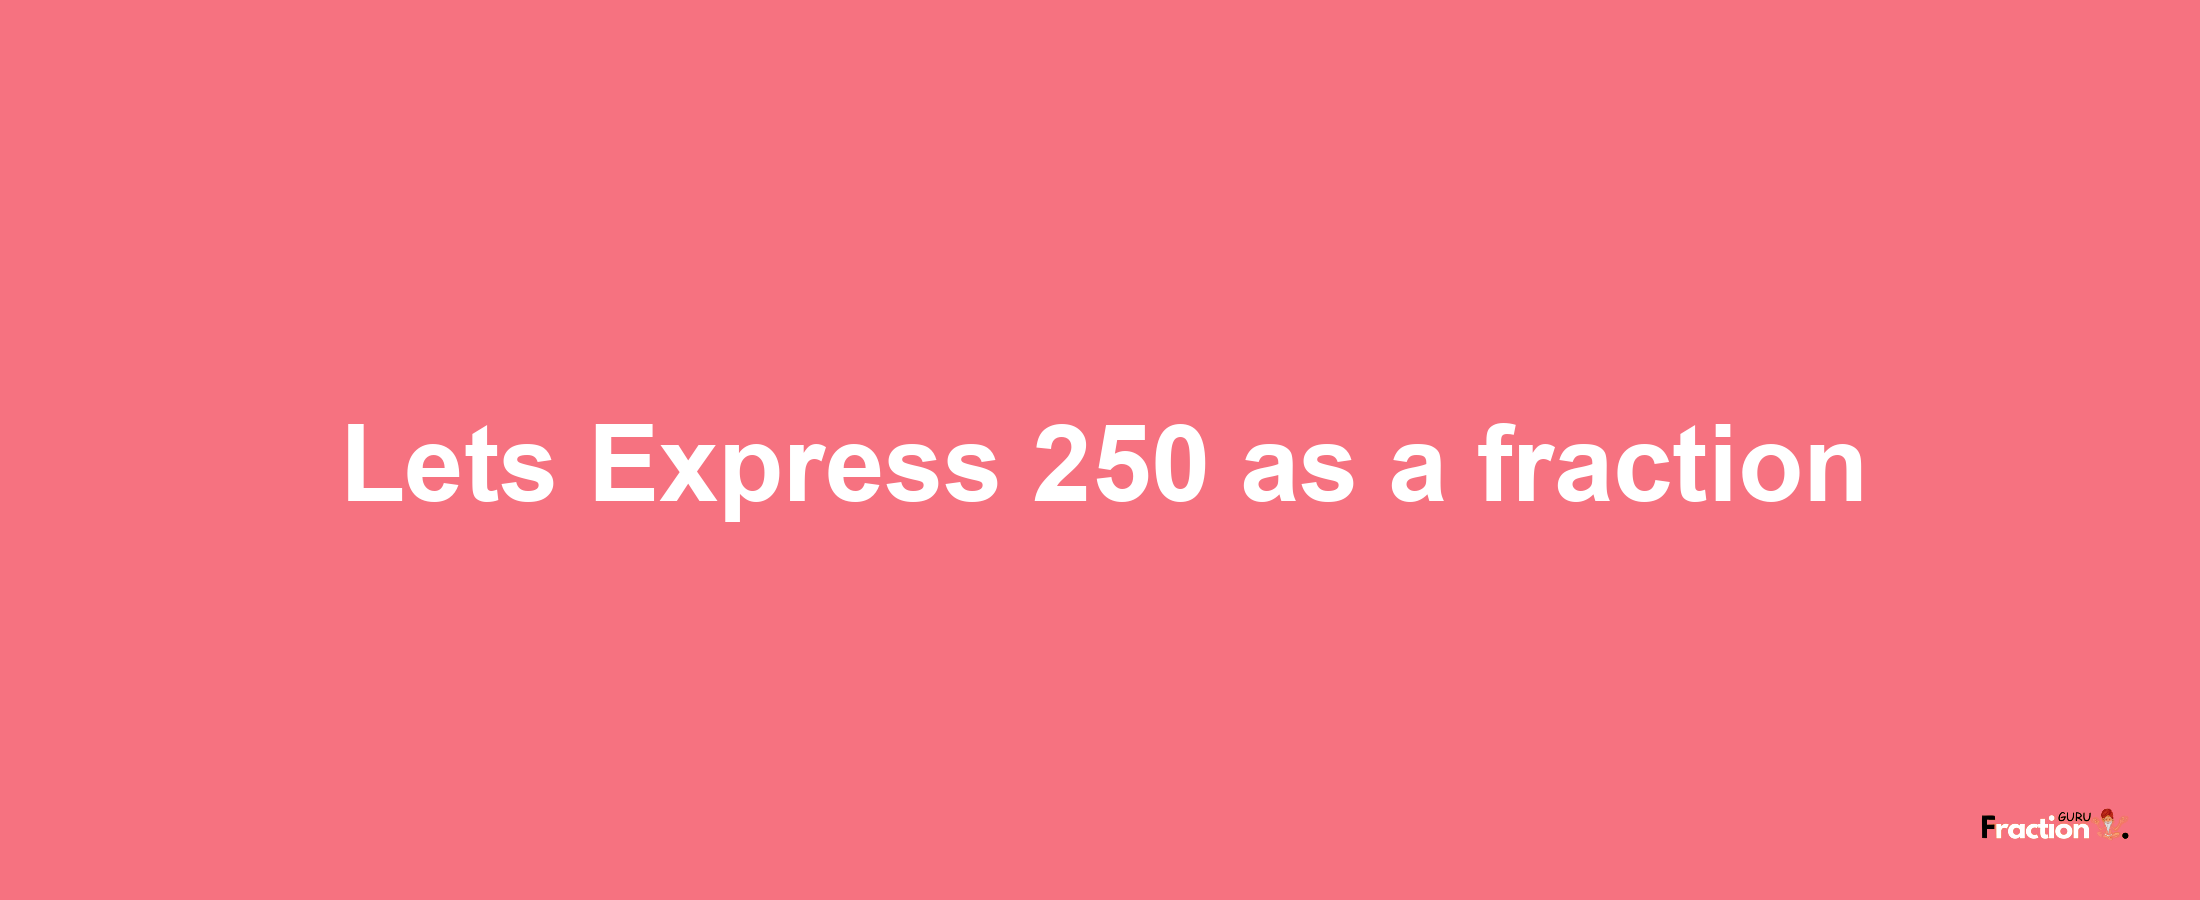 Lets Express 250 as afraction